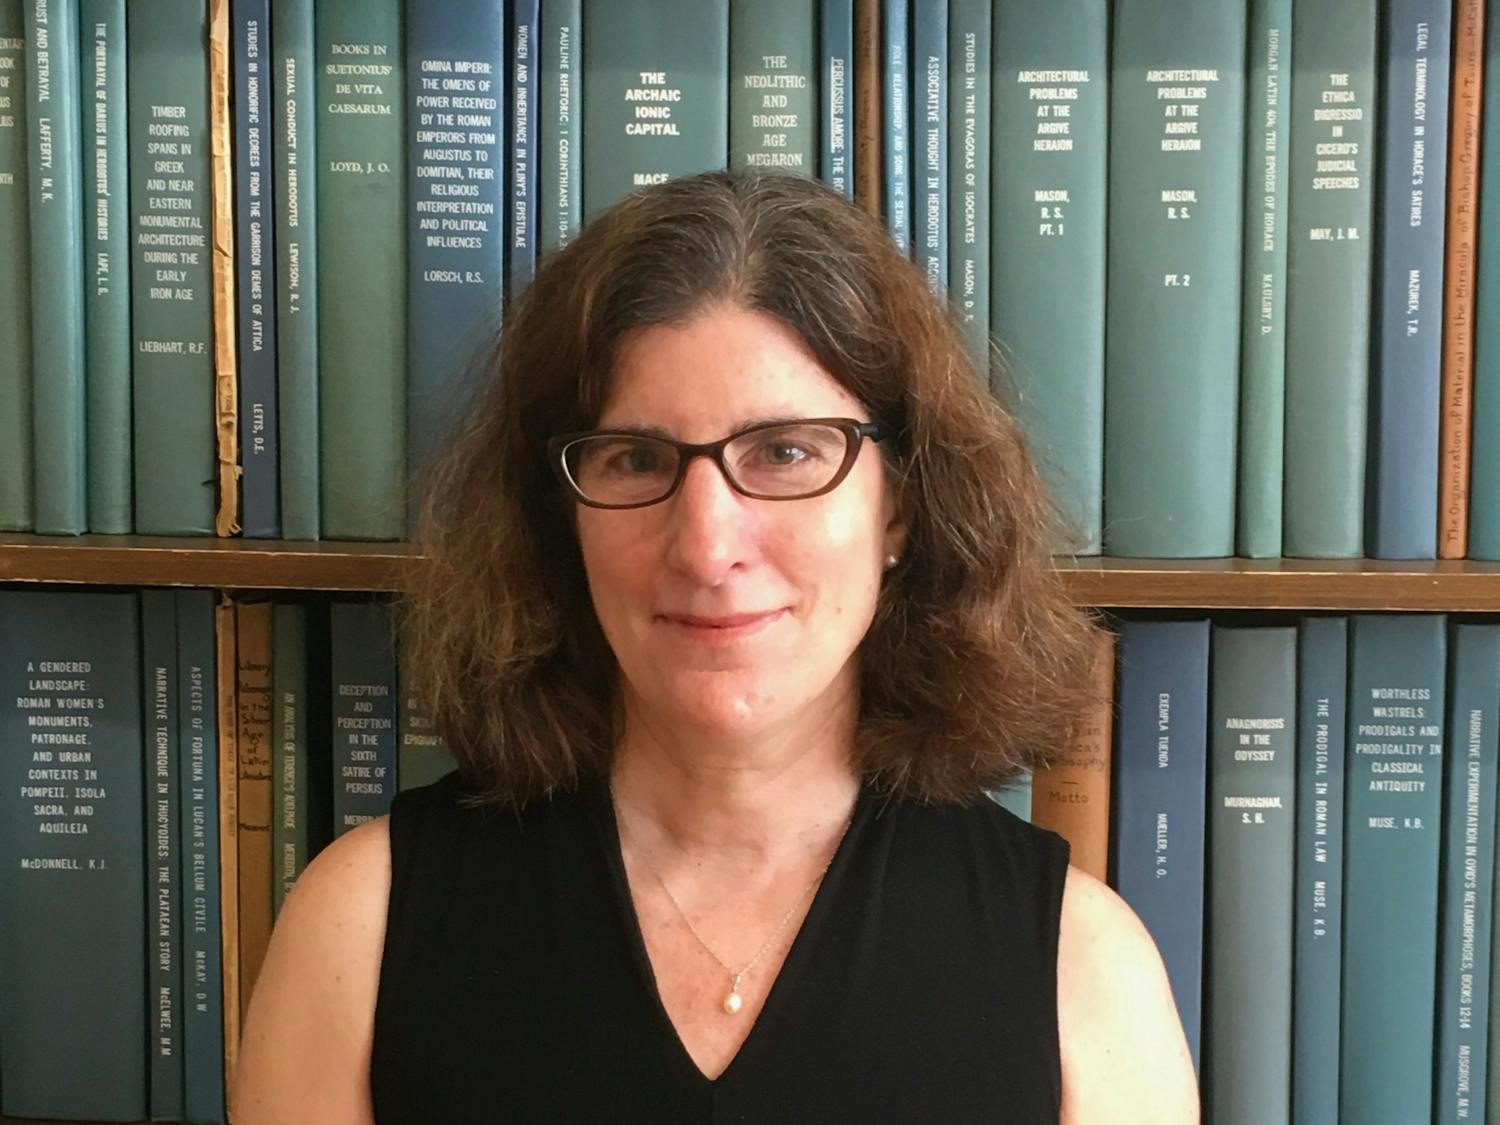 Patricia Rosenmeyer is the new director of the Carolina Center for Jewish Studies. Photo courtesy of Patricia Rosenmeyer.